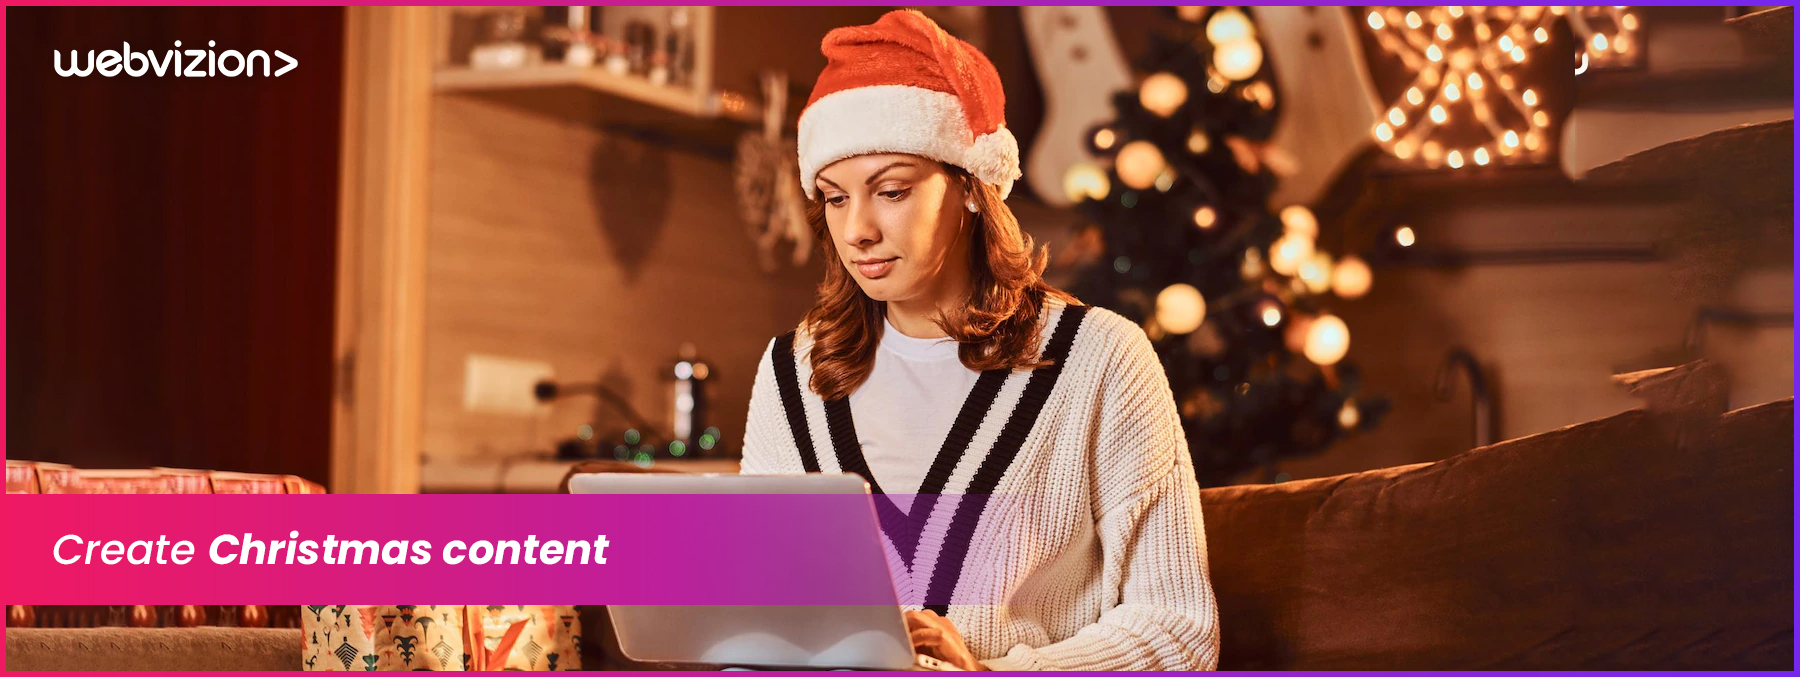 How-to-make-your-e-commerce-site-ready-for-Christmas-Webvizion-Global